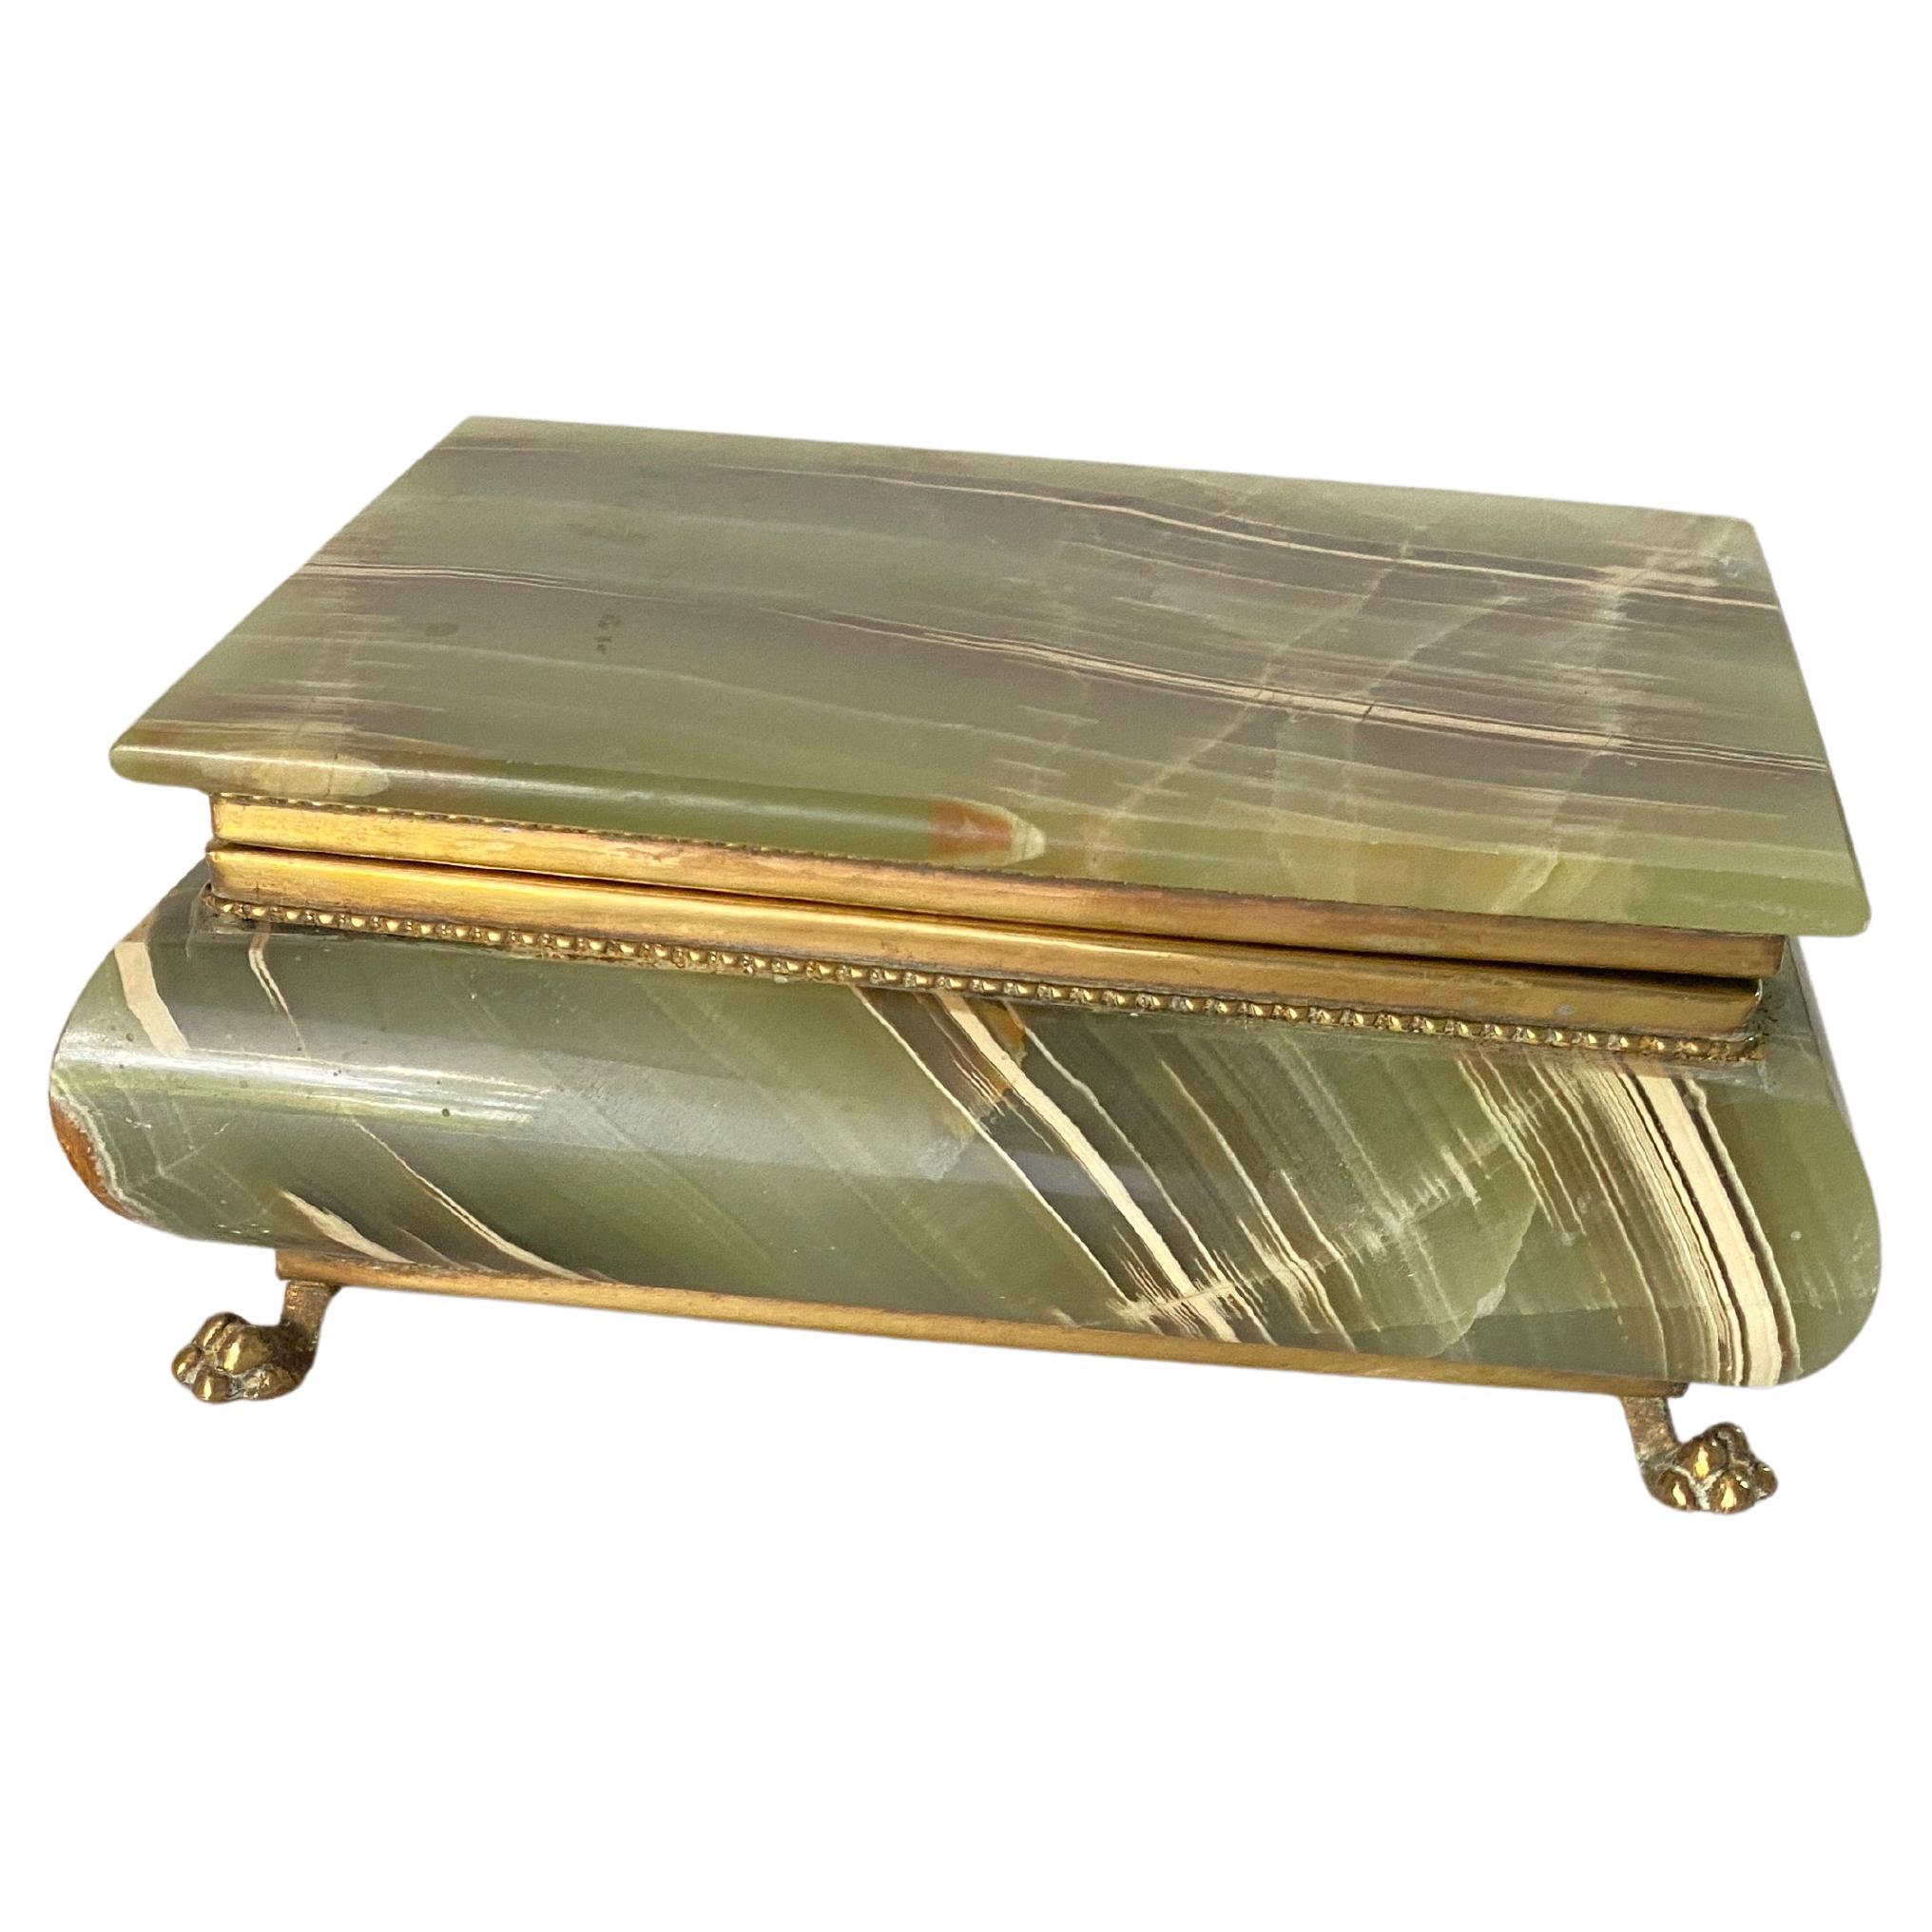 It is a box in Onyx, with the structures in Brass, as well as the feet of the box. The interior is lined with red felt. It is a jewelry box, which was made in Italy in the 1950s. It is very heavy. Green in color with Veinings of different other